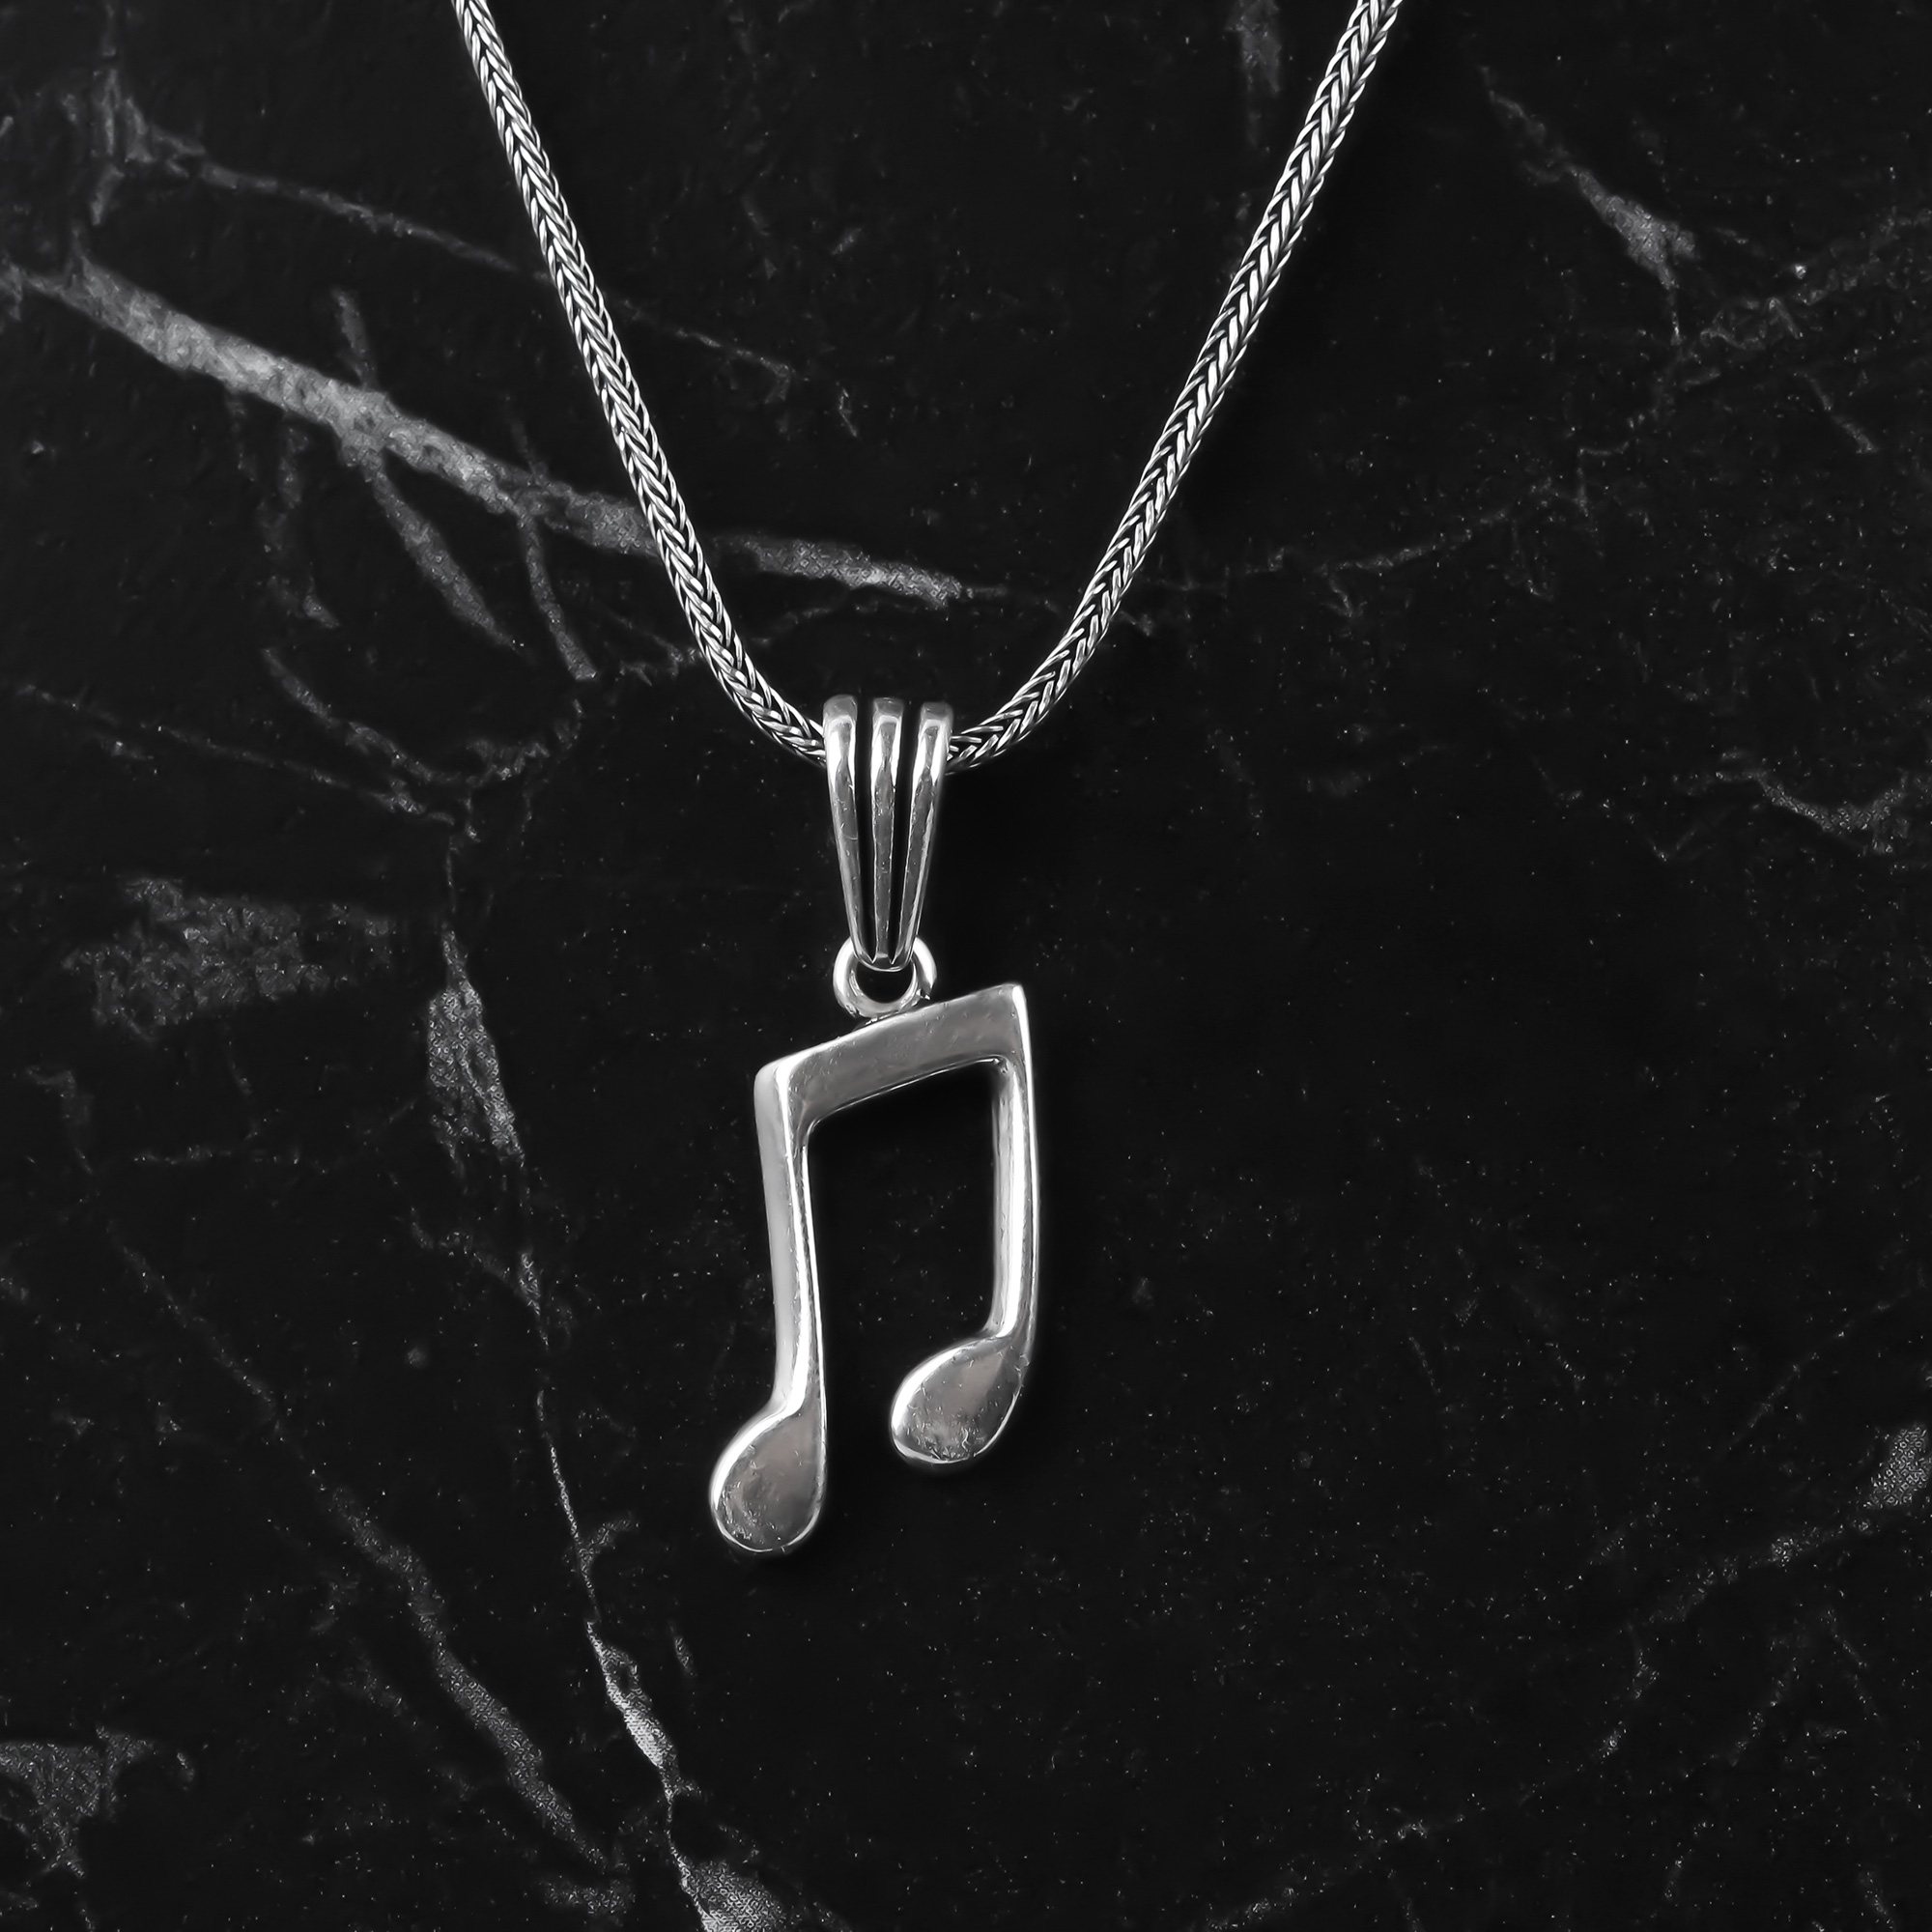 Buy Sterling Silver Music Note Necklace Online in India - Etsy